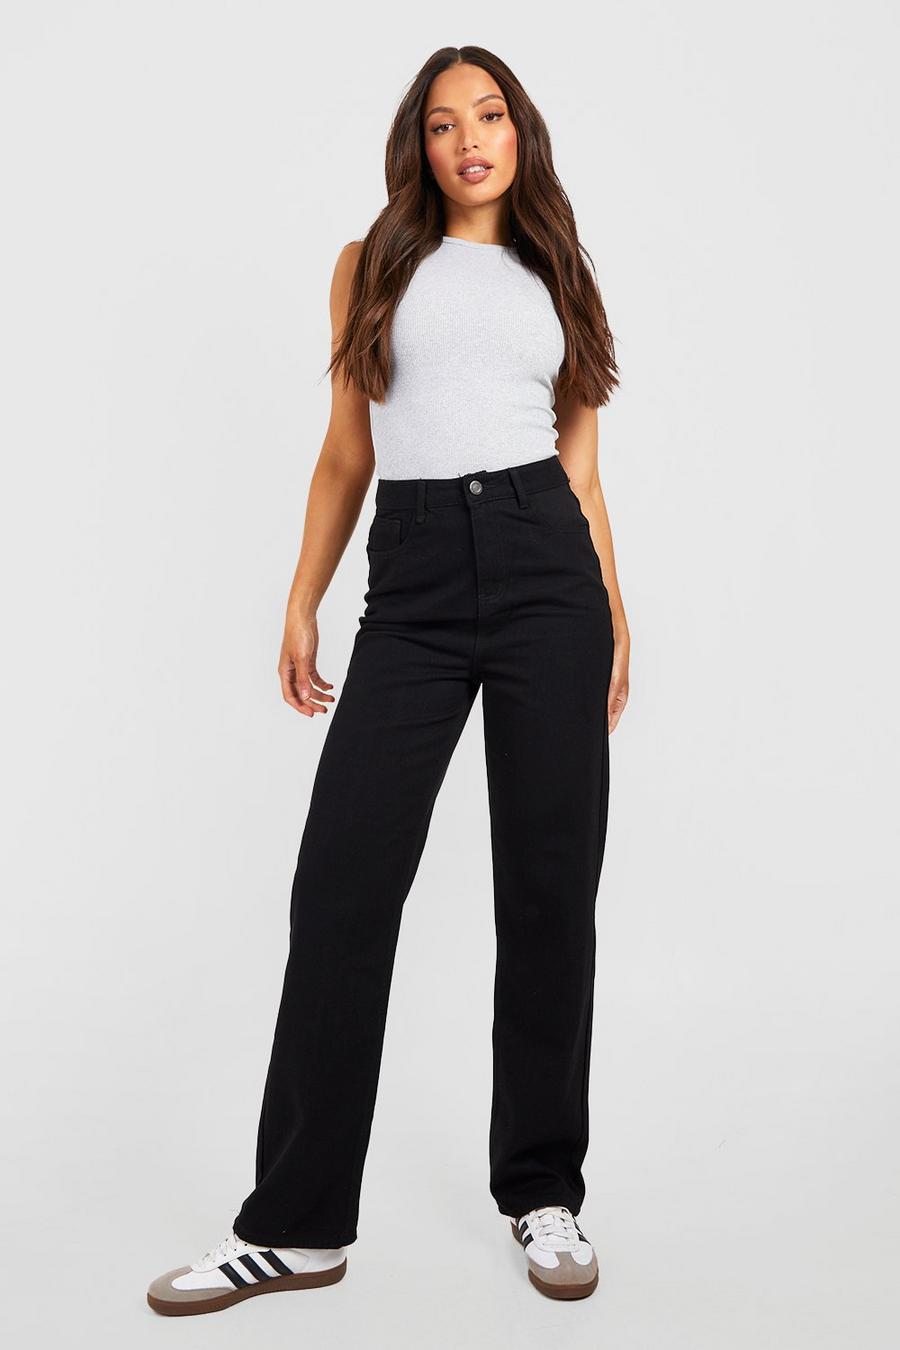 Black Tall High Waisted Straight Fit Jeans